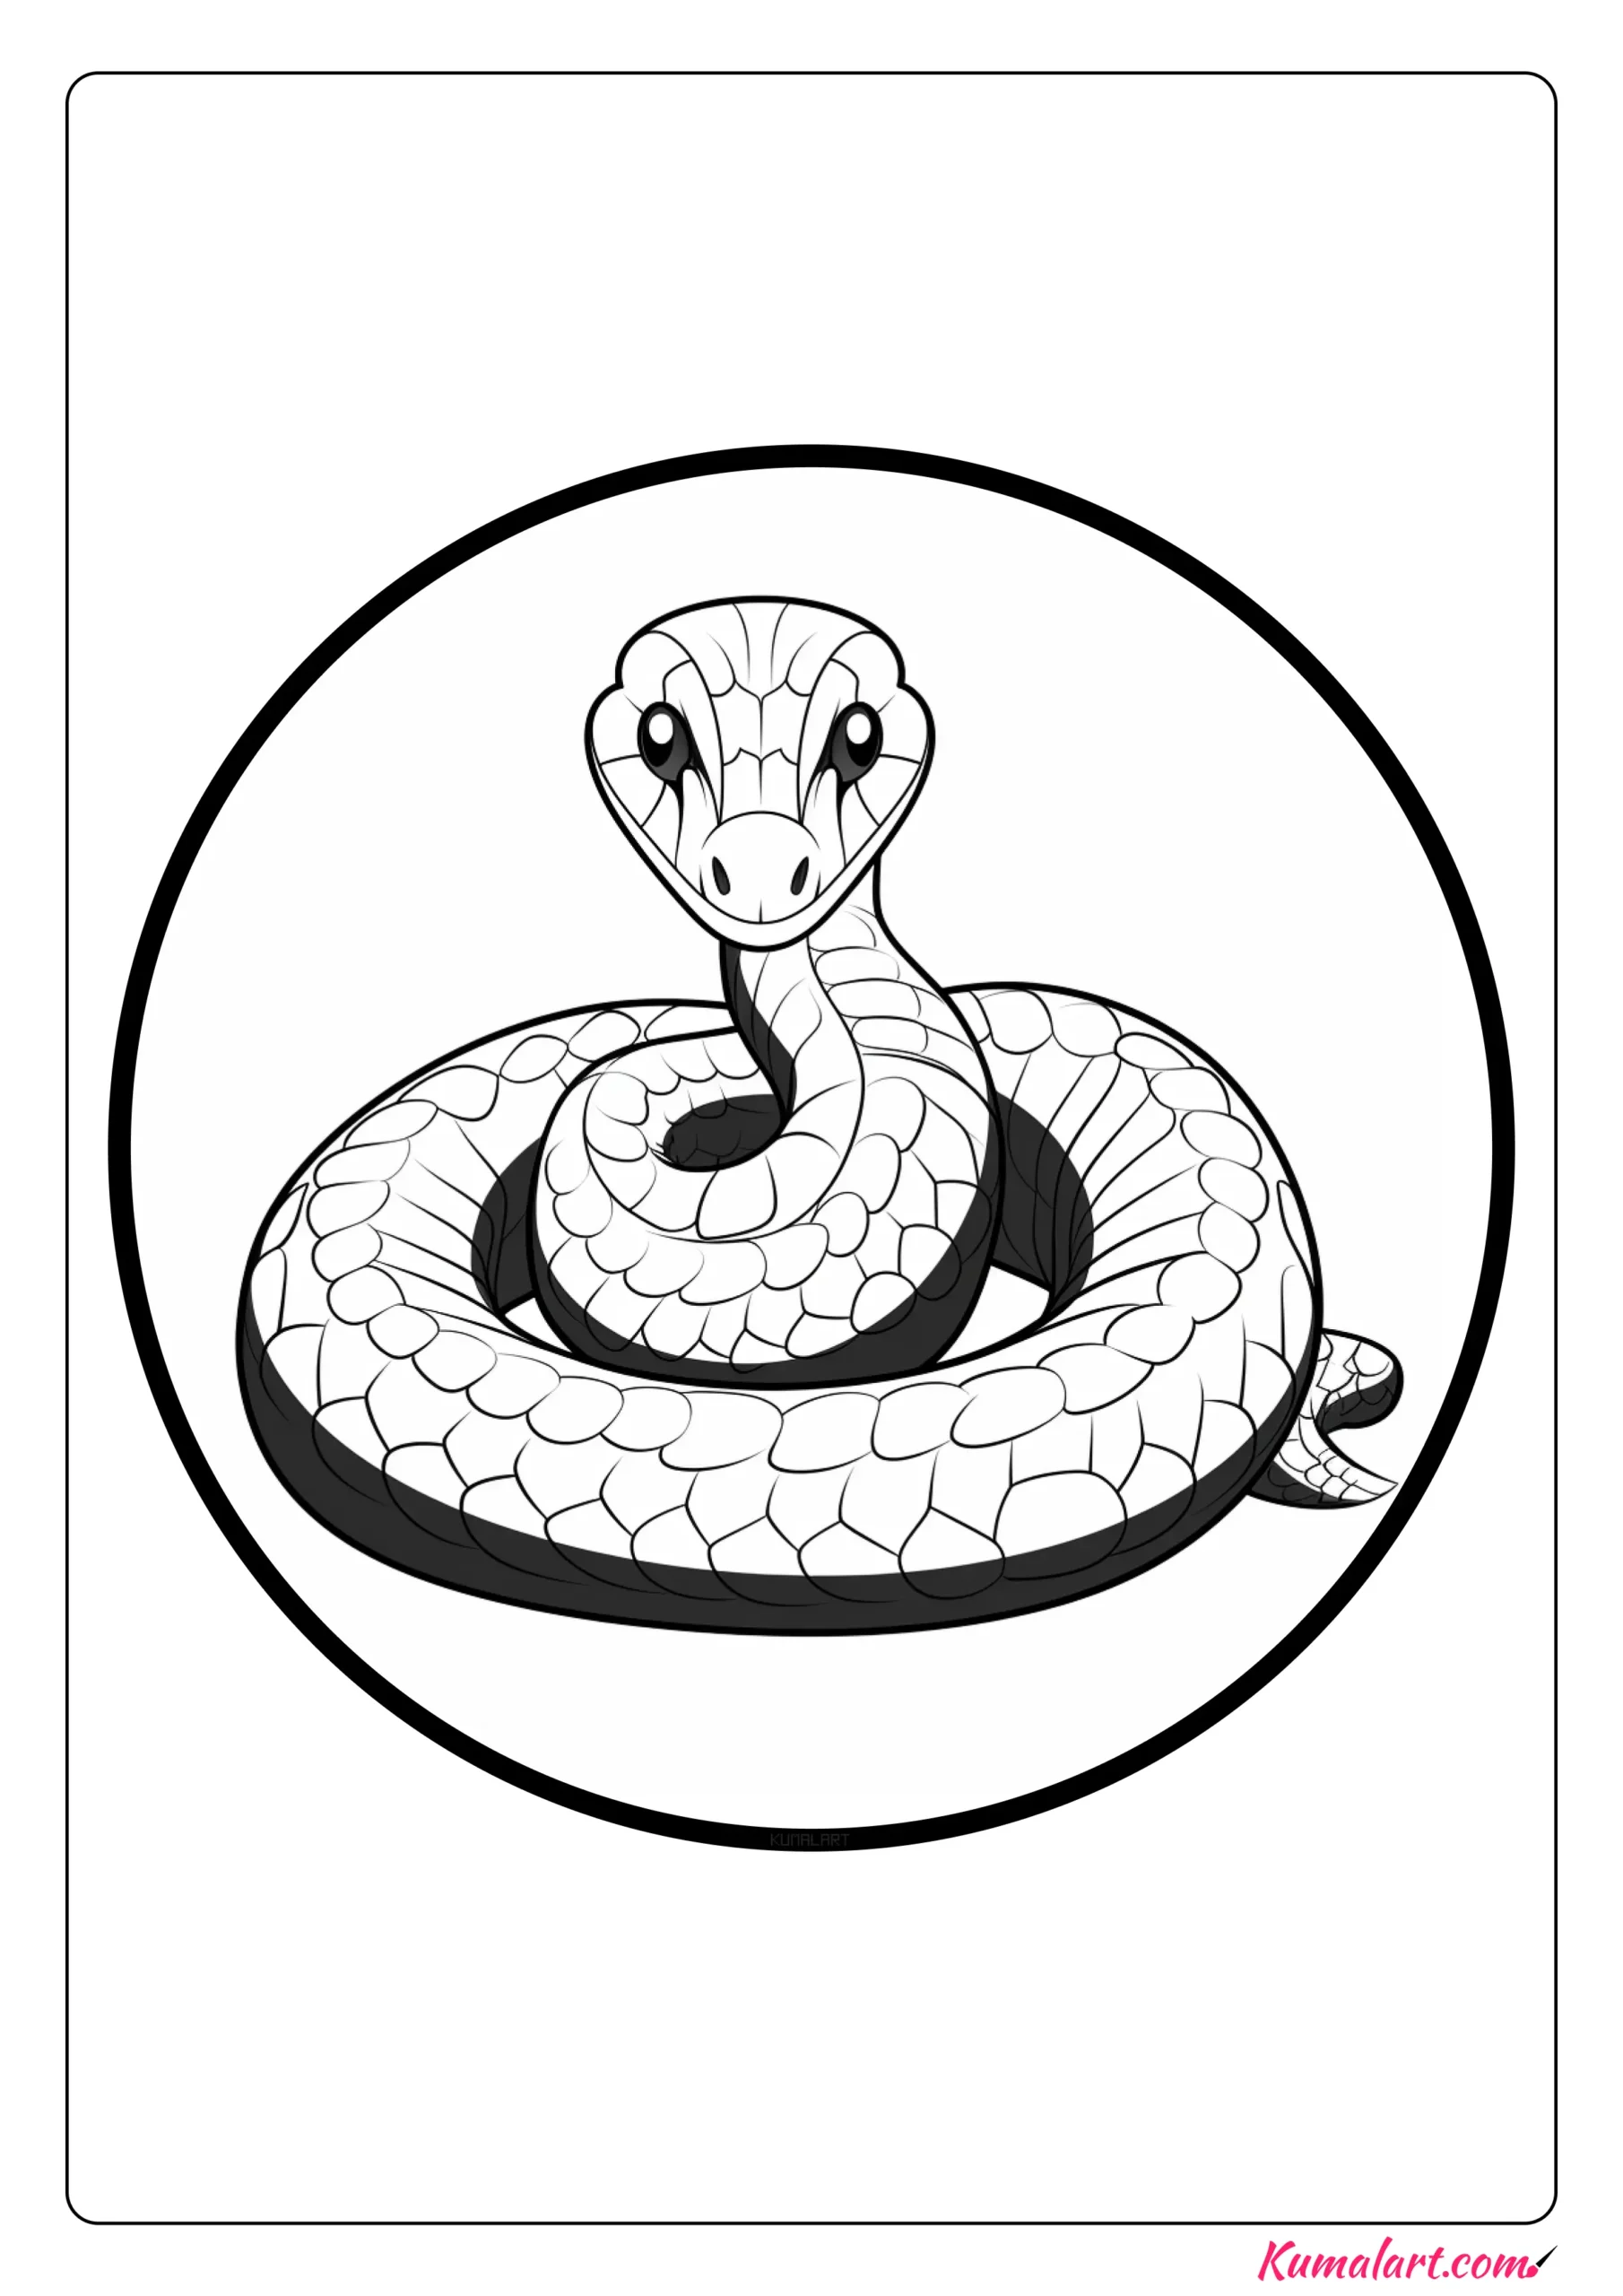 Prairie Rattle Snake Coloring Page